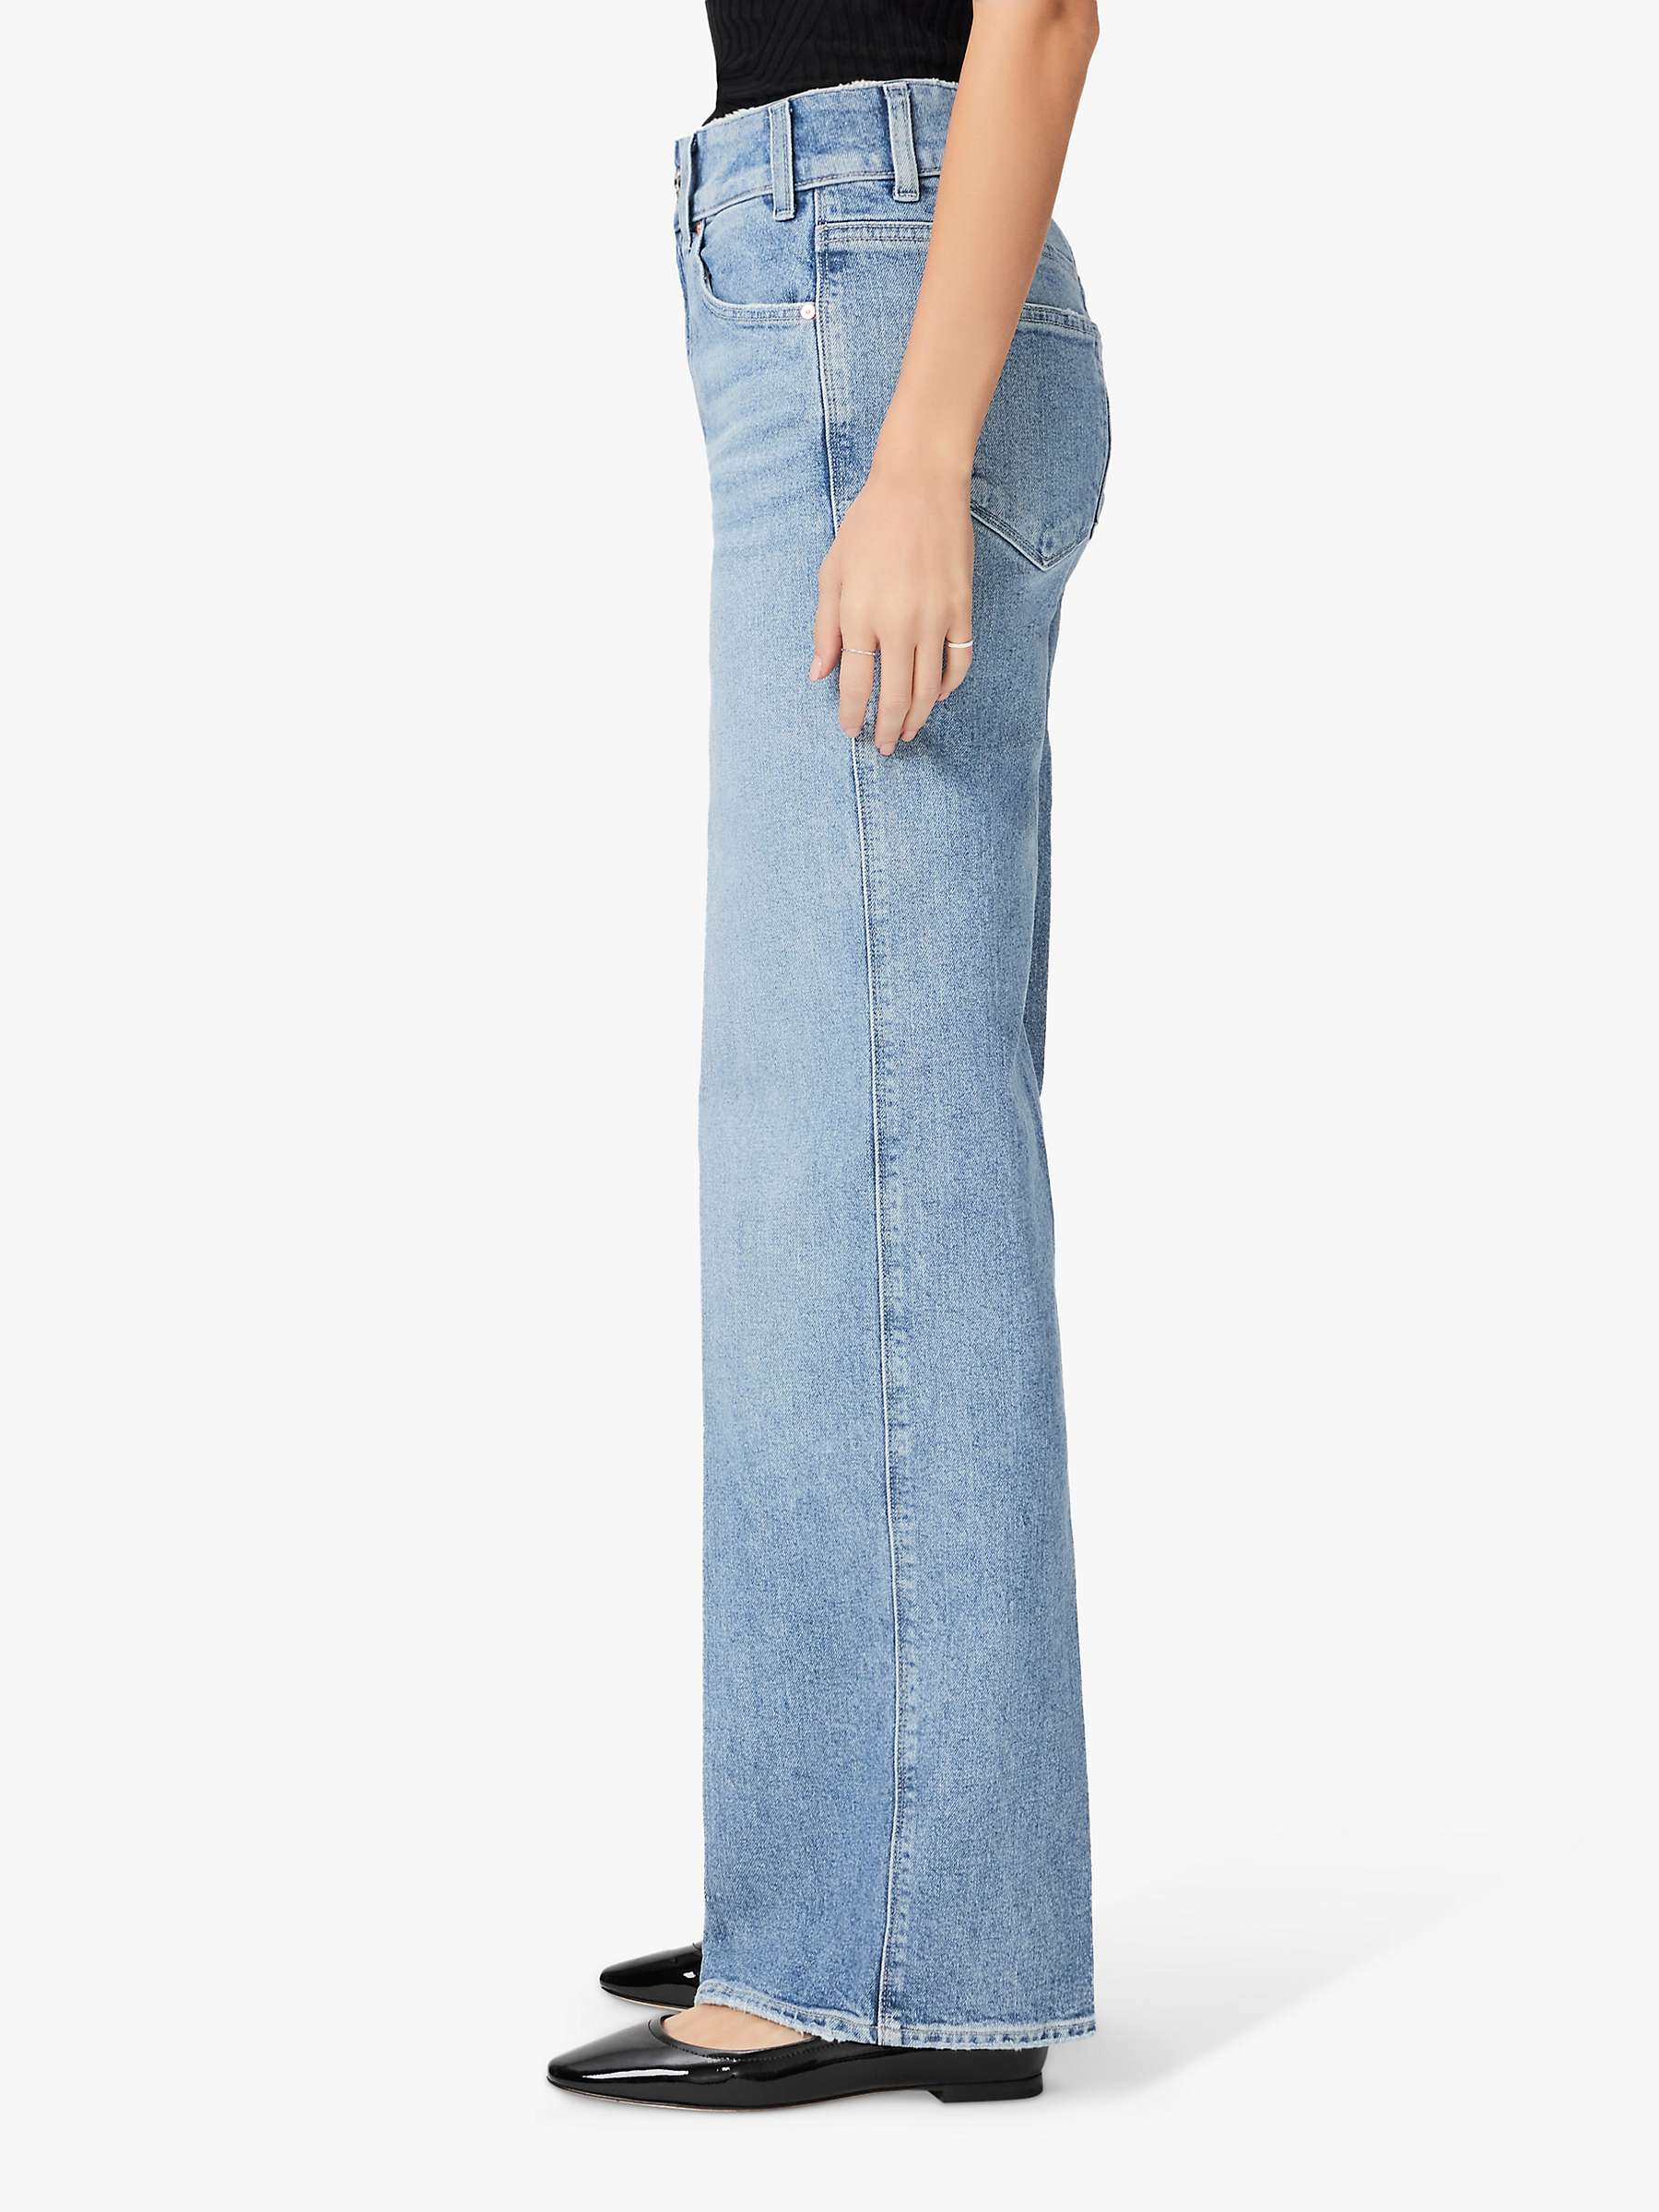 Buy PAIGE Sasha High Rise Straight Cut Jeans, Khristen Distressed Online at johnlewis.com